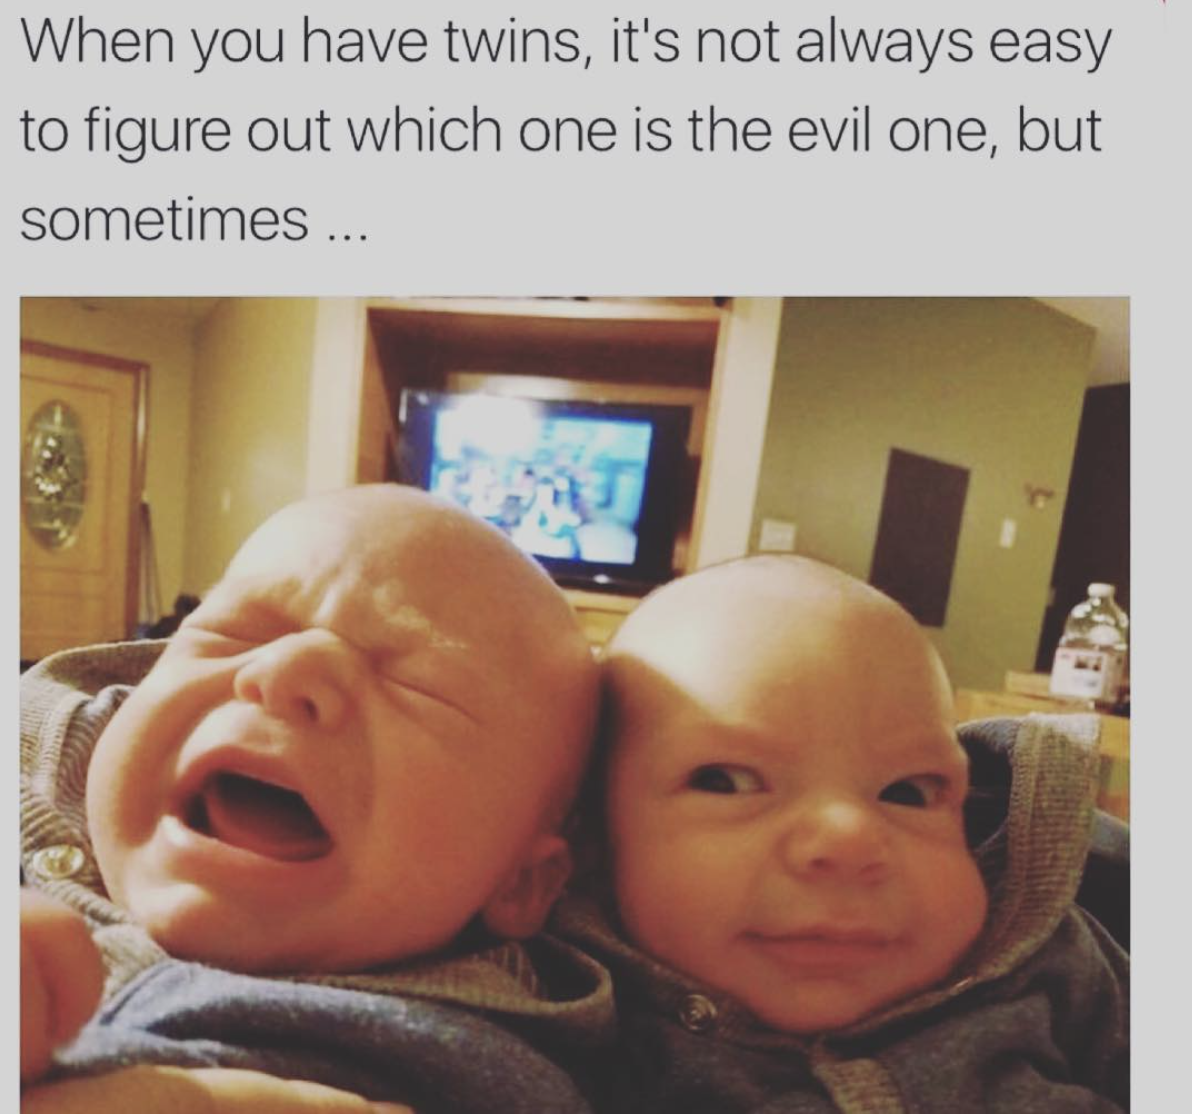 best twin jokes - When you have twins, it's not always easy to figure out which one is the evil one, but sometimes ...